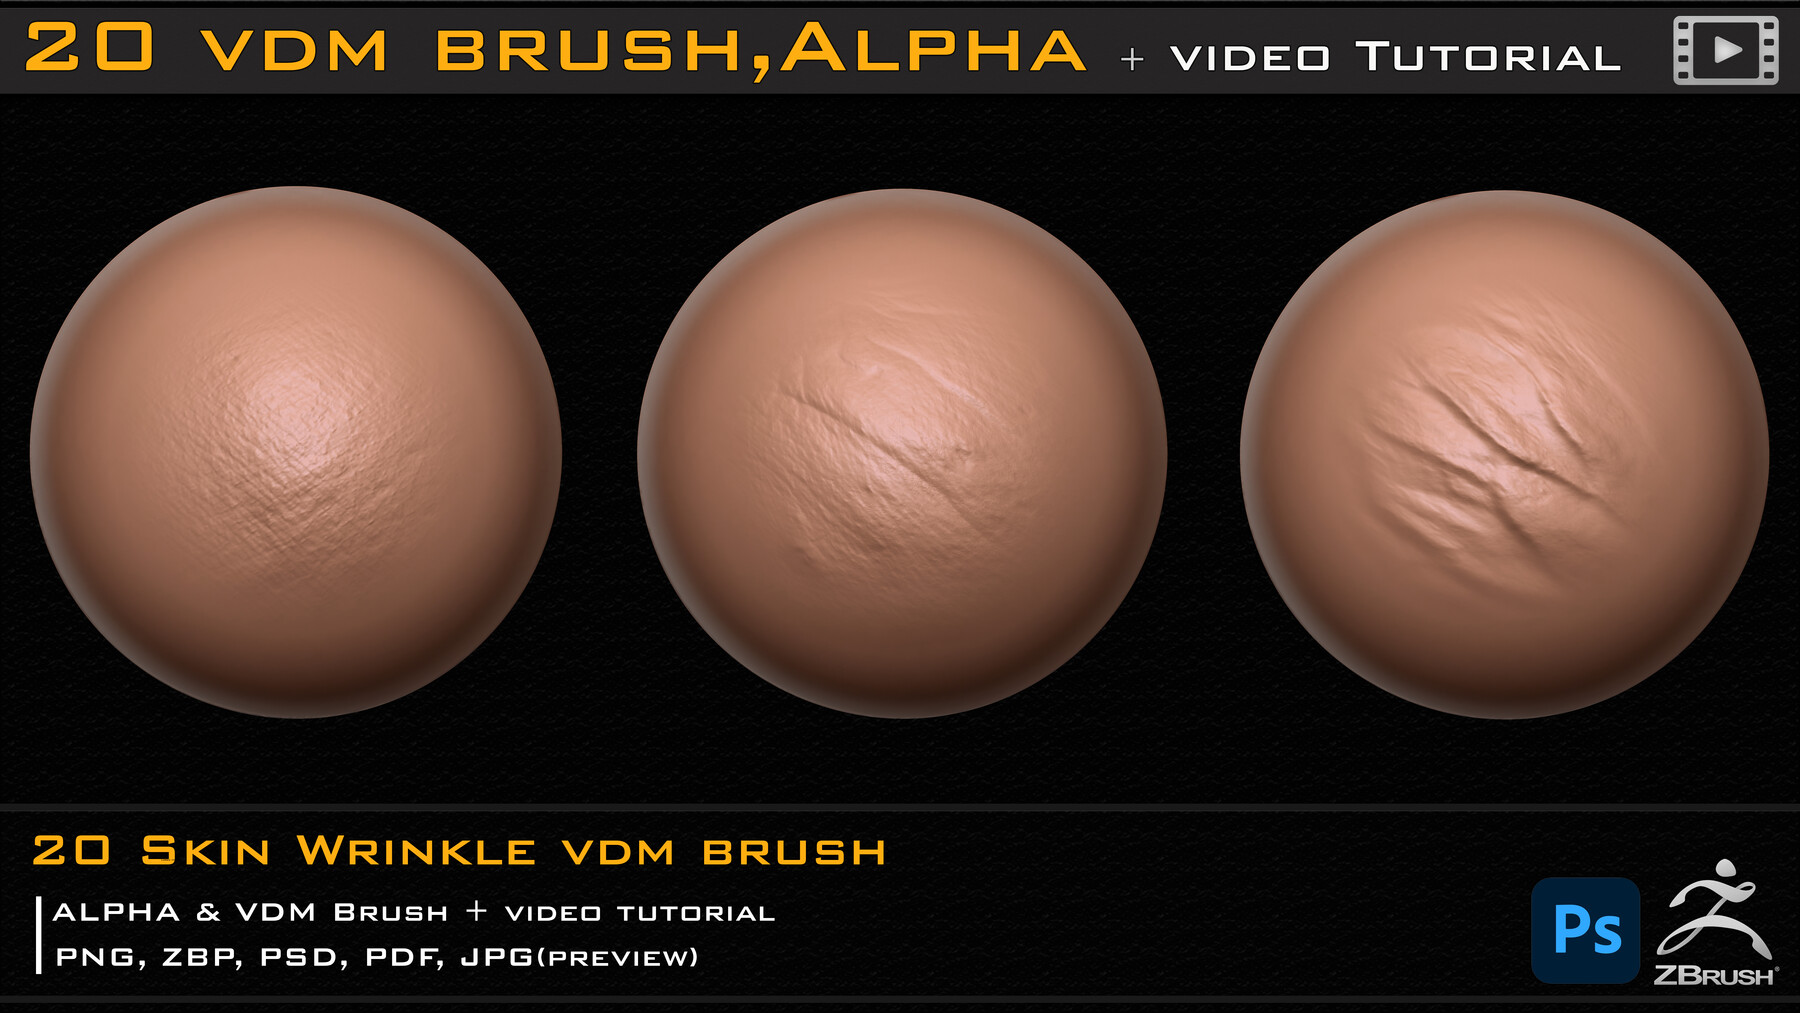 ArtStation - 100 Leather & Fabric Brush/Alpha + Video How To Use